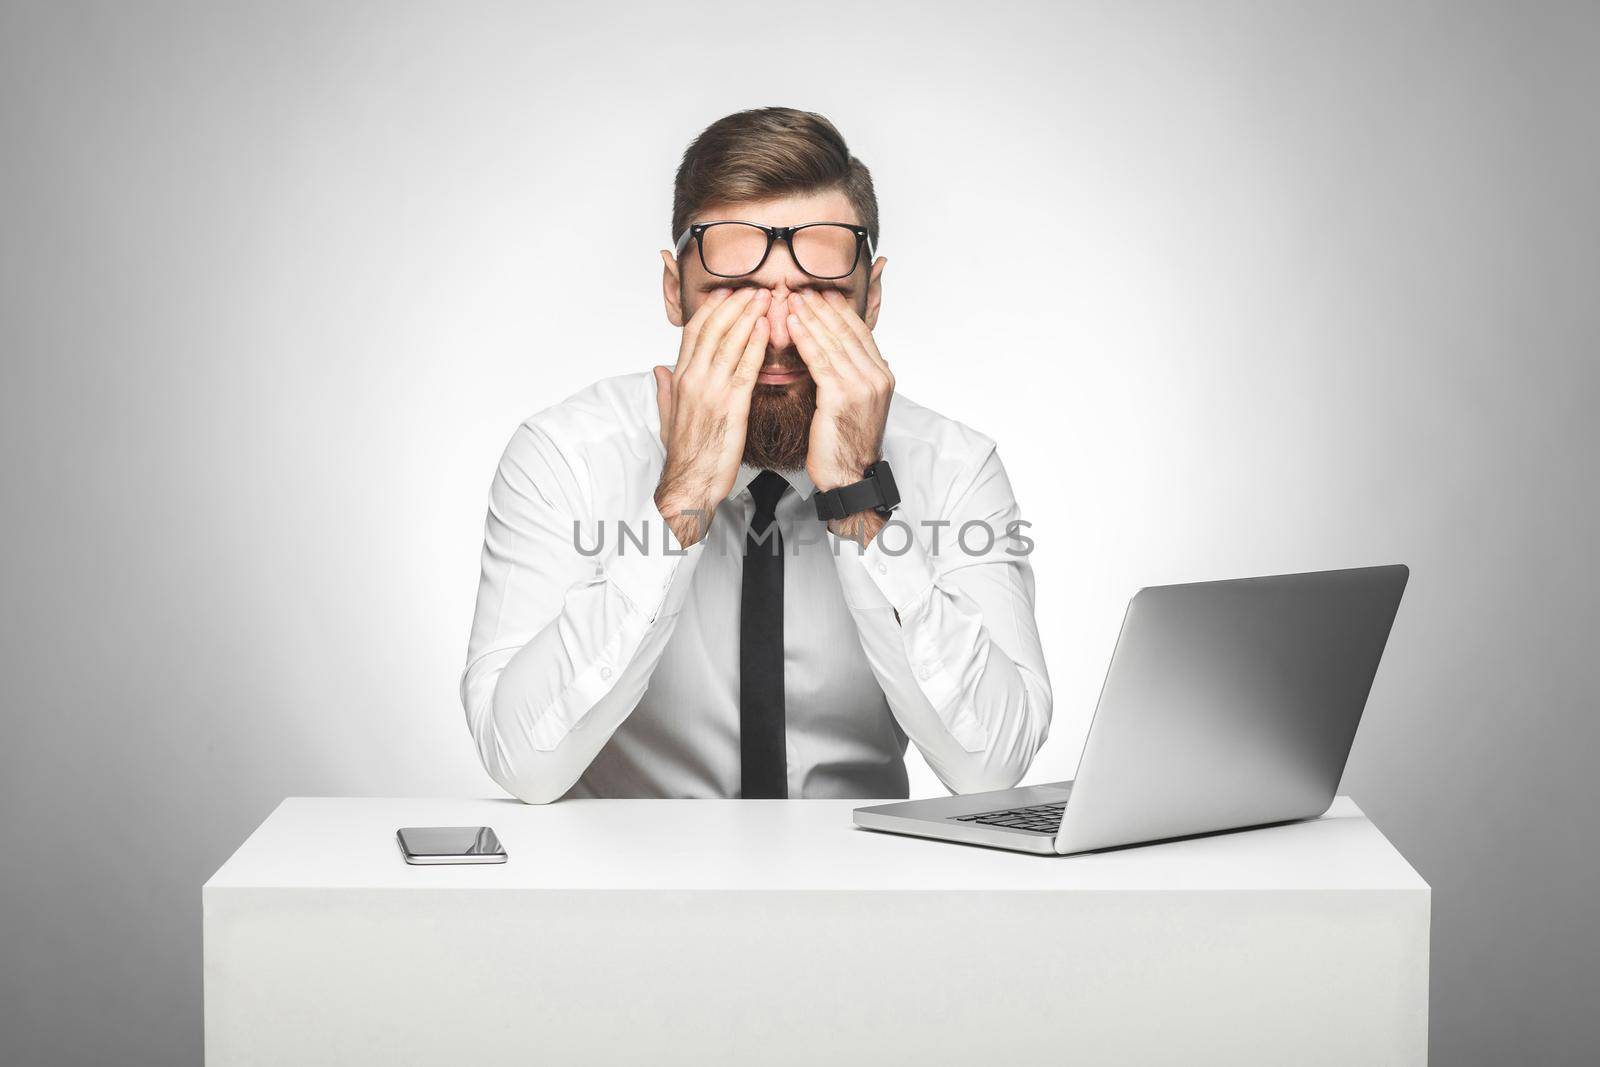 man sitting in office rubbing eyes after long work on the computer, making important report by Khosro1